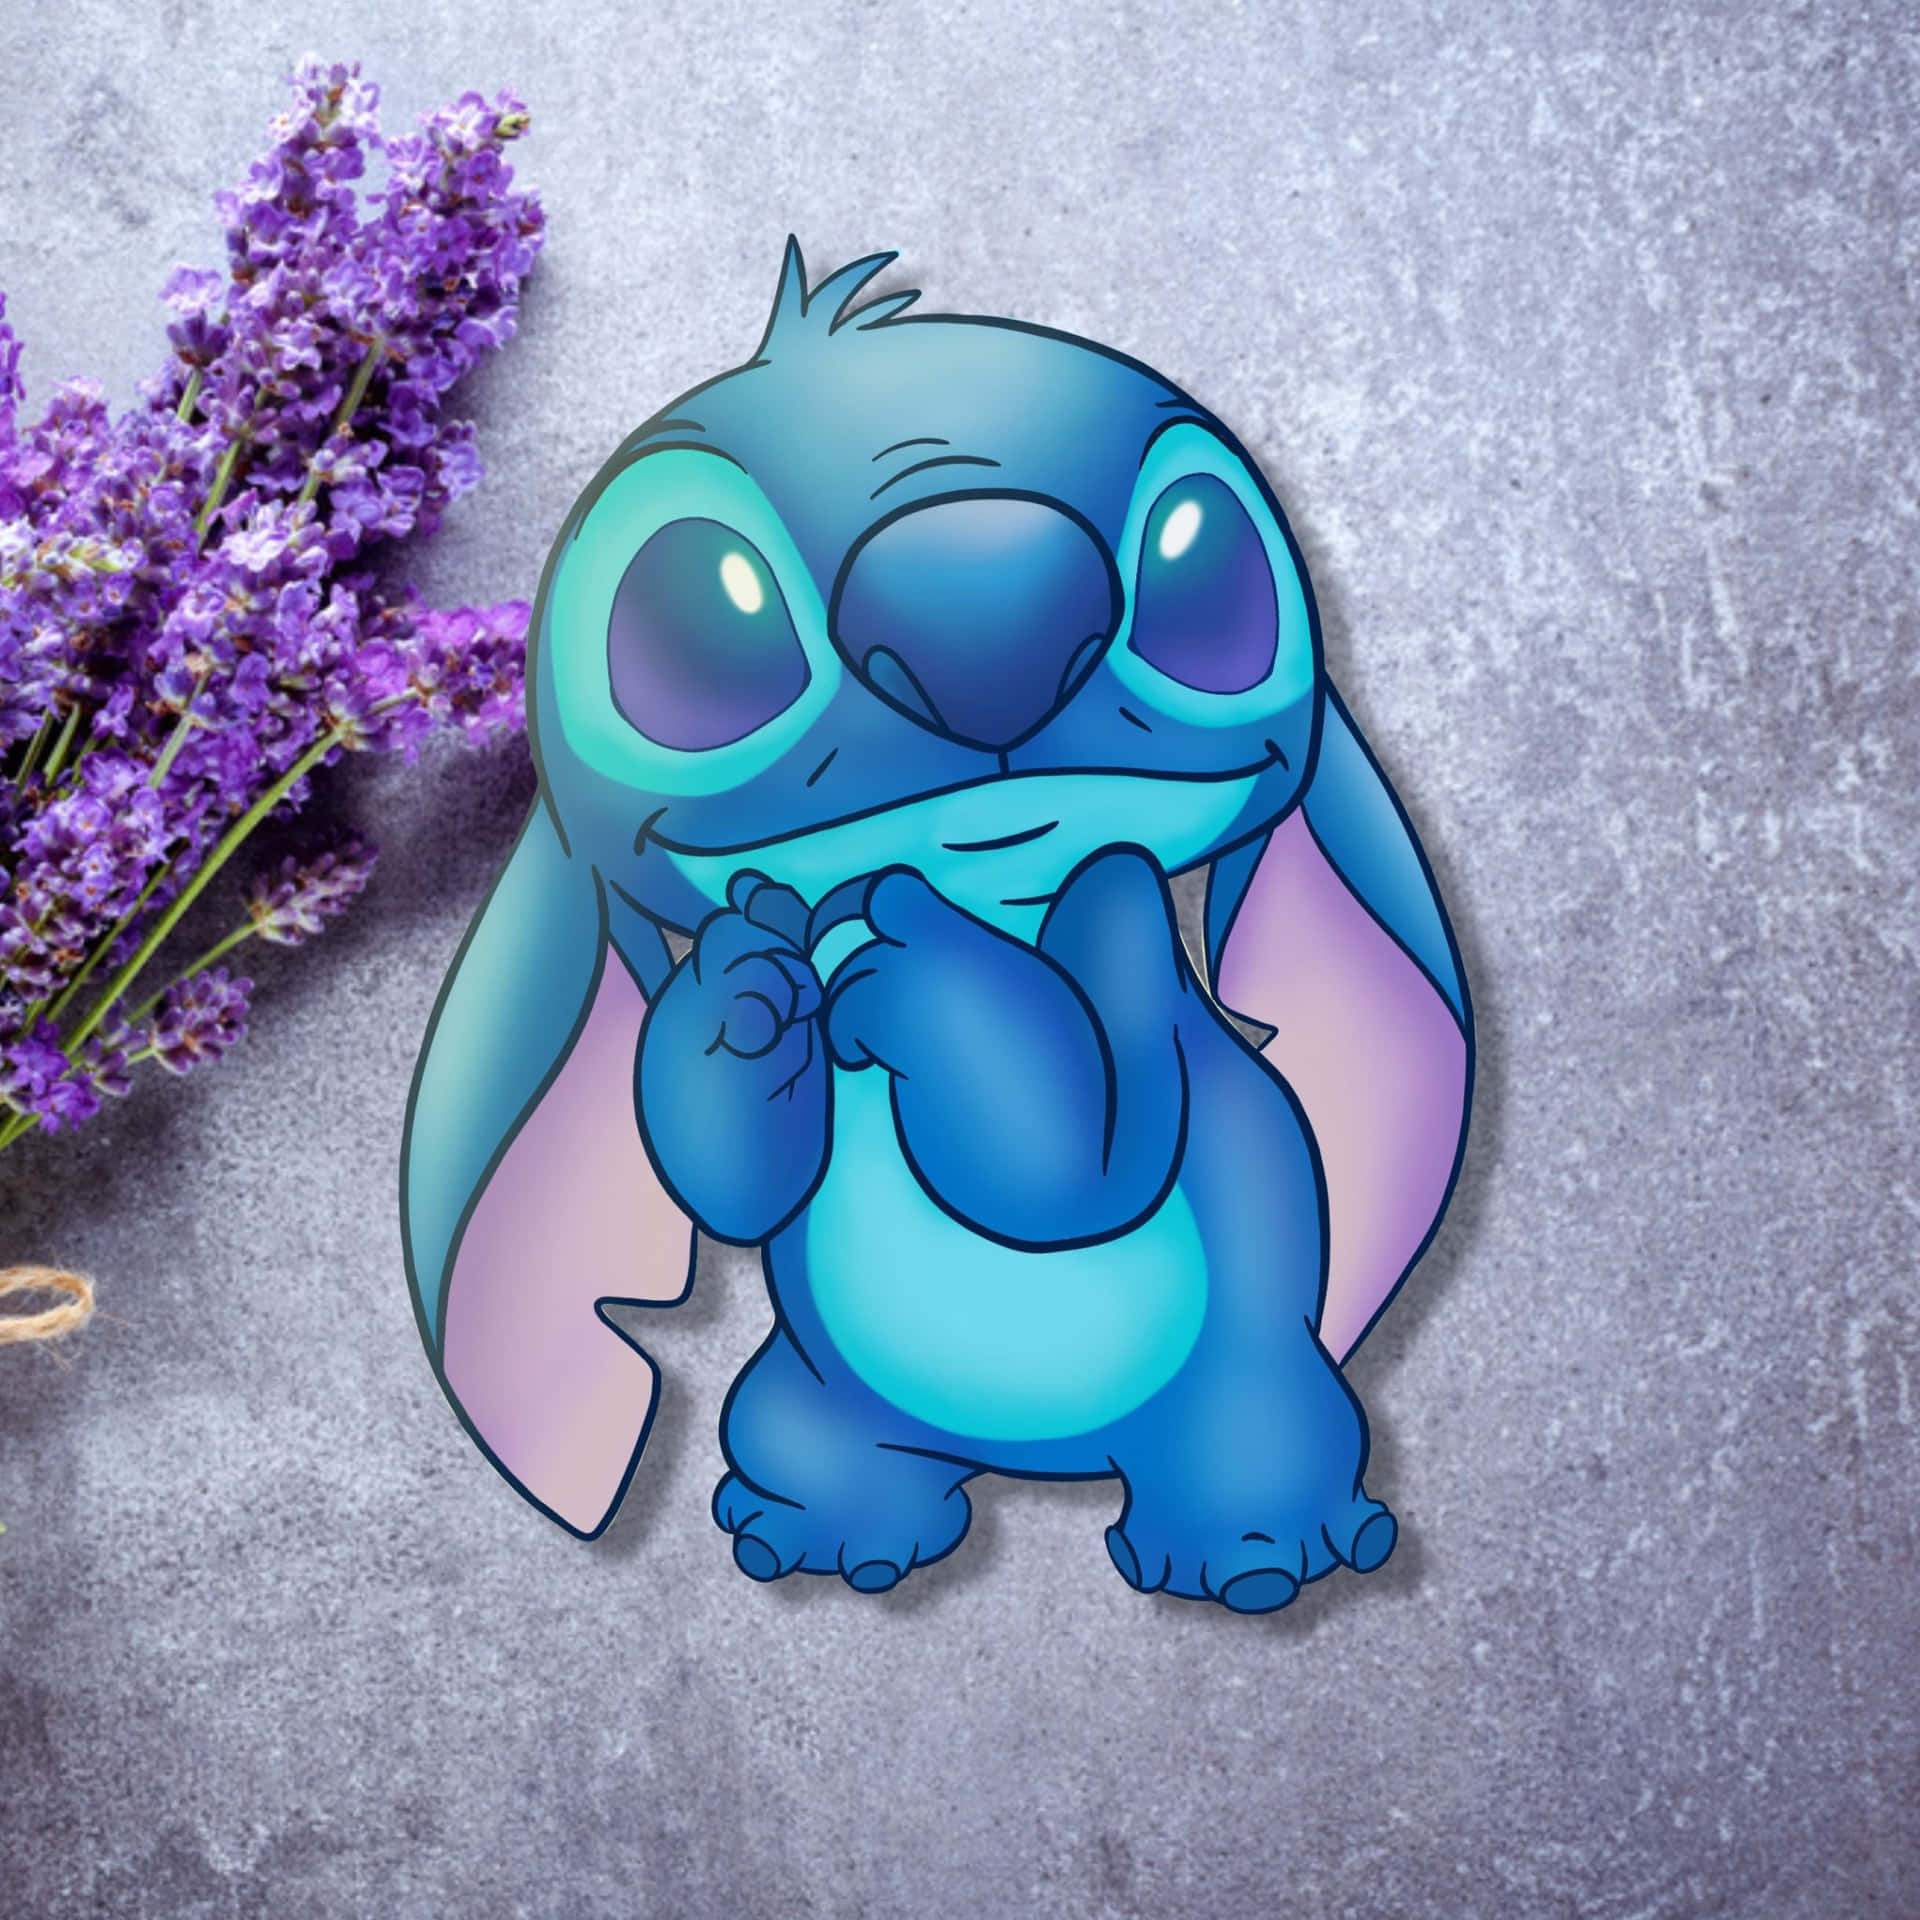 "Sad Stitch longs for the companionship of another" Wallpaper